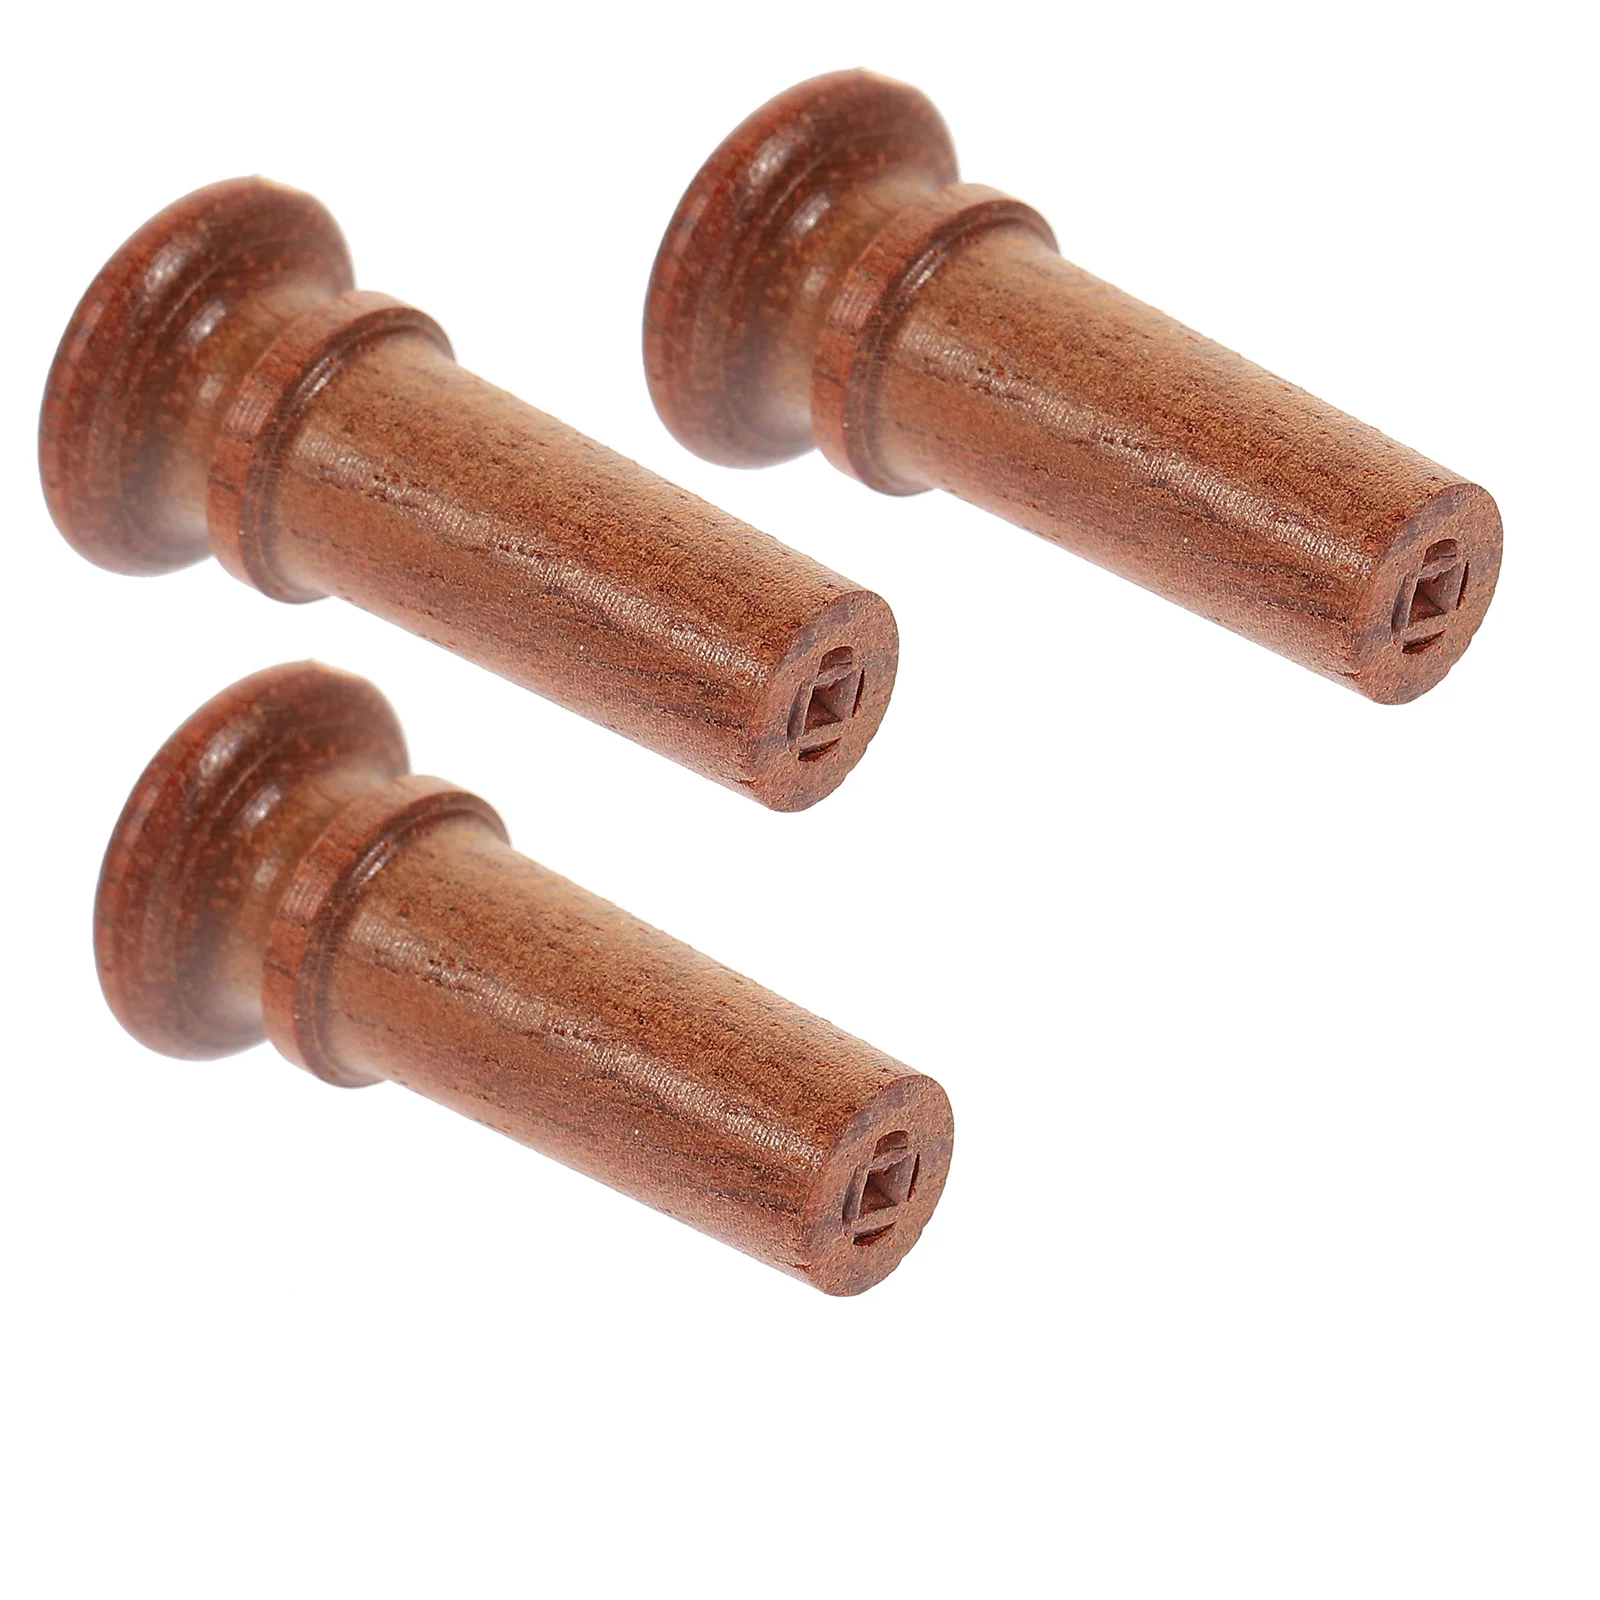 

3 Pcs Violin Tail Button Chic Design Screws Chin Rest Accessory Plugs Jujube Endpin Pegs Wood